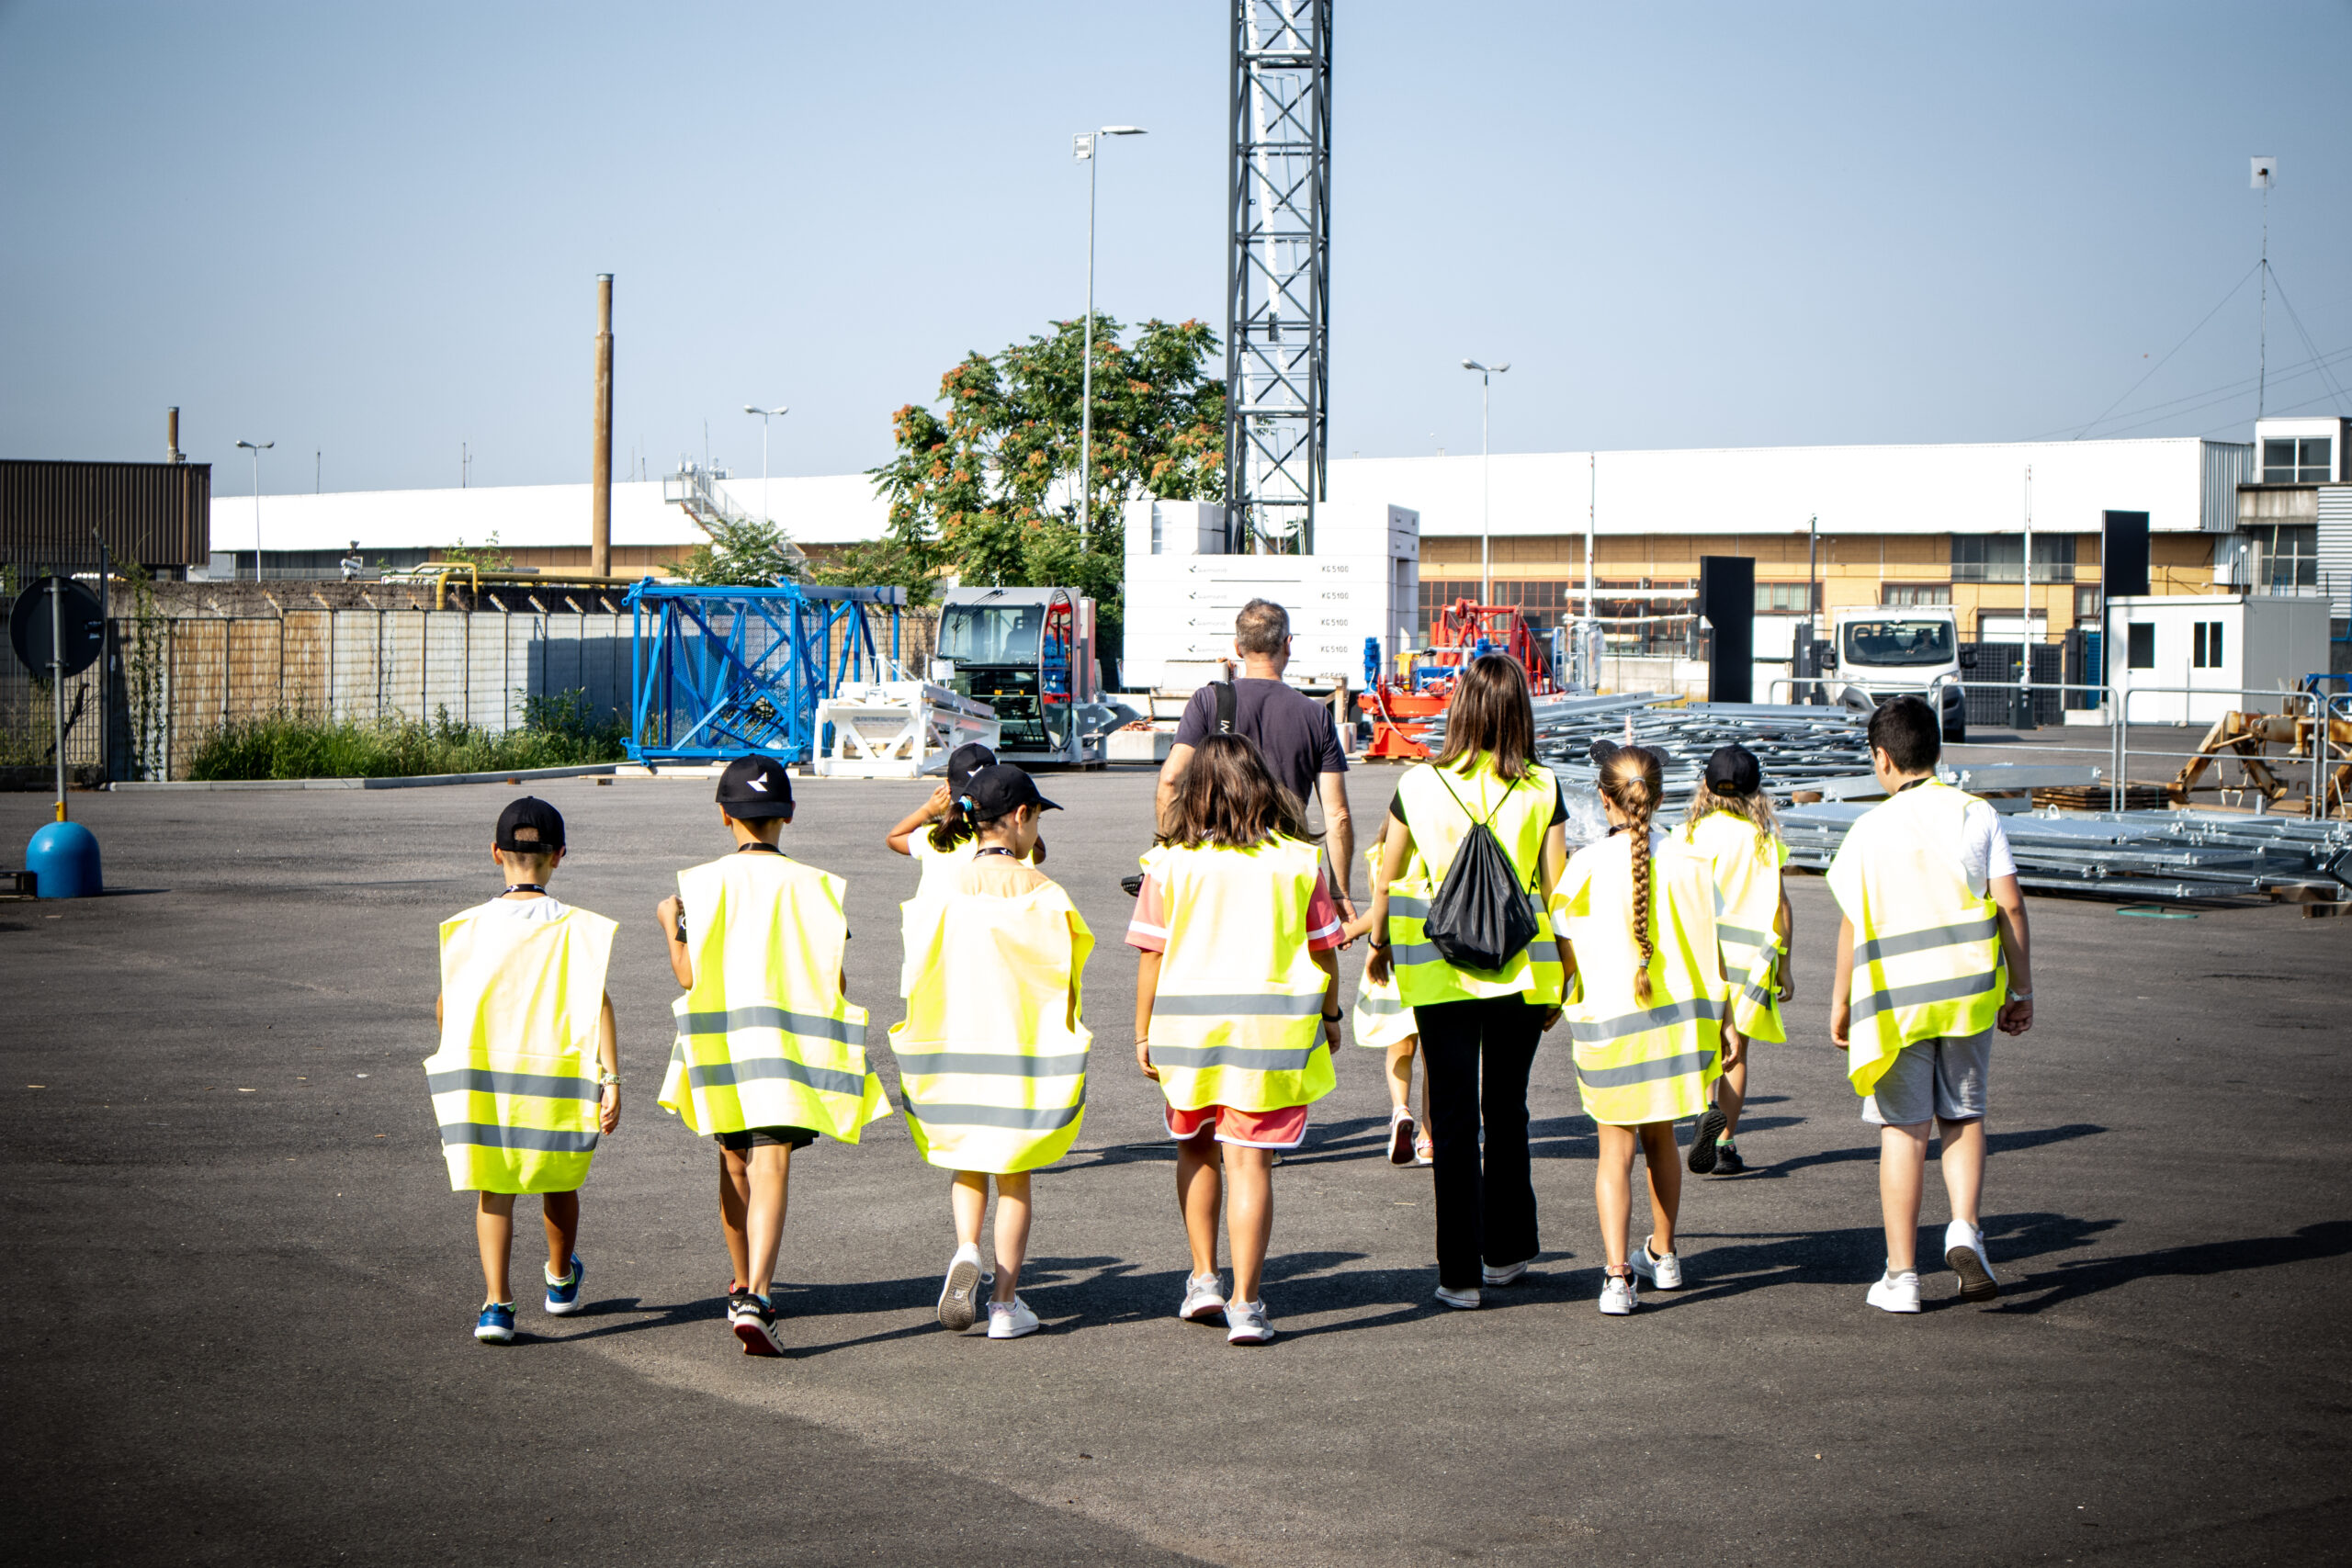 Raimondi Cranes Summer Camp engages young minds with STEM activities